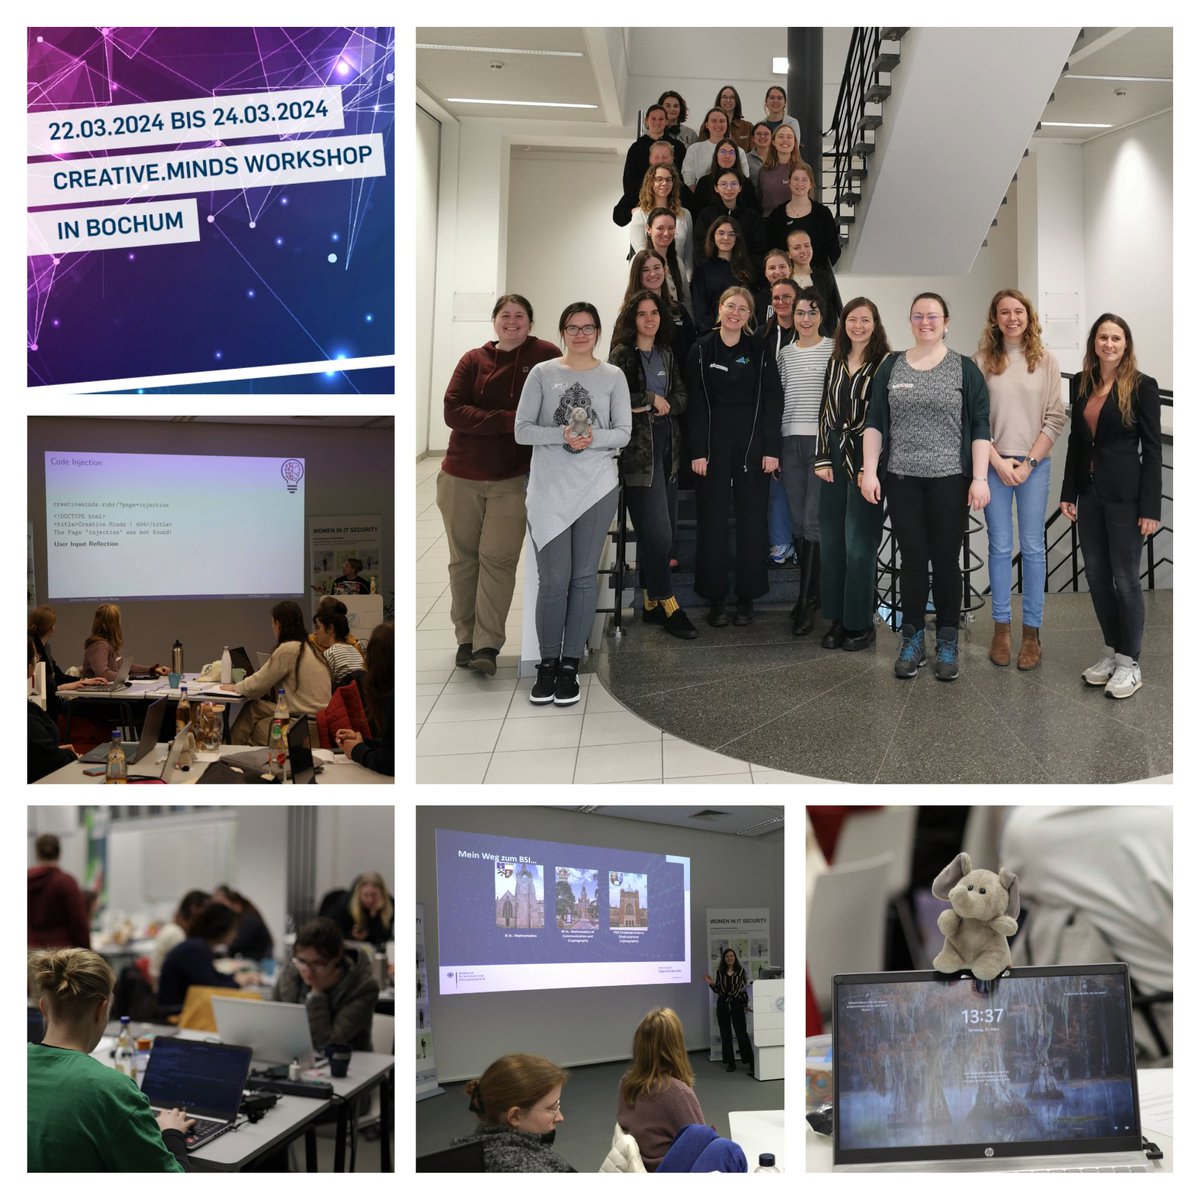 👩‍💻The Creative.Minds Workshop 2024 offered young women an exciting crash course on cyber security. With hands-on challenges, networking and insights from Dr. Clara Schneidewind (@KunigundeII), Prof. Dr. Katharina Kohls (@blister_green) and more➡️casa.rub.de/en/news/casa/n…